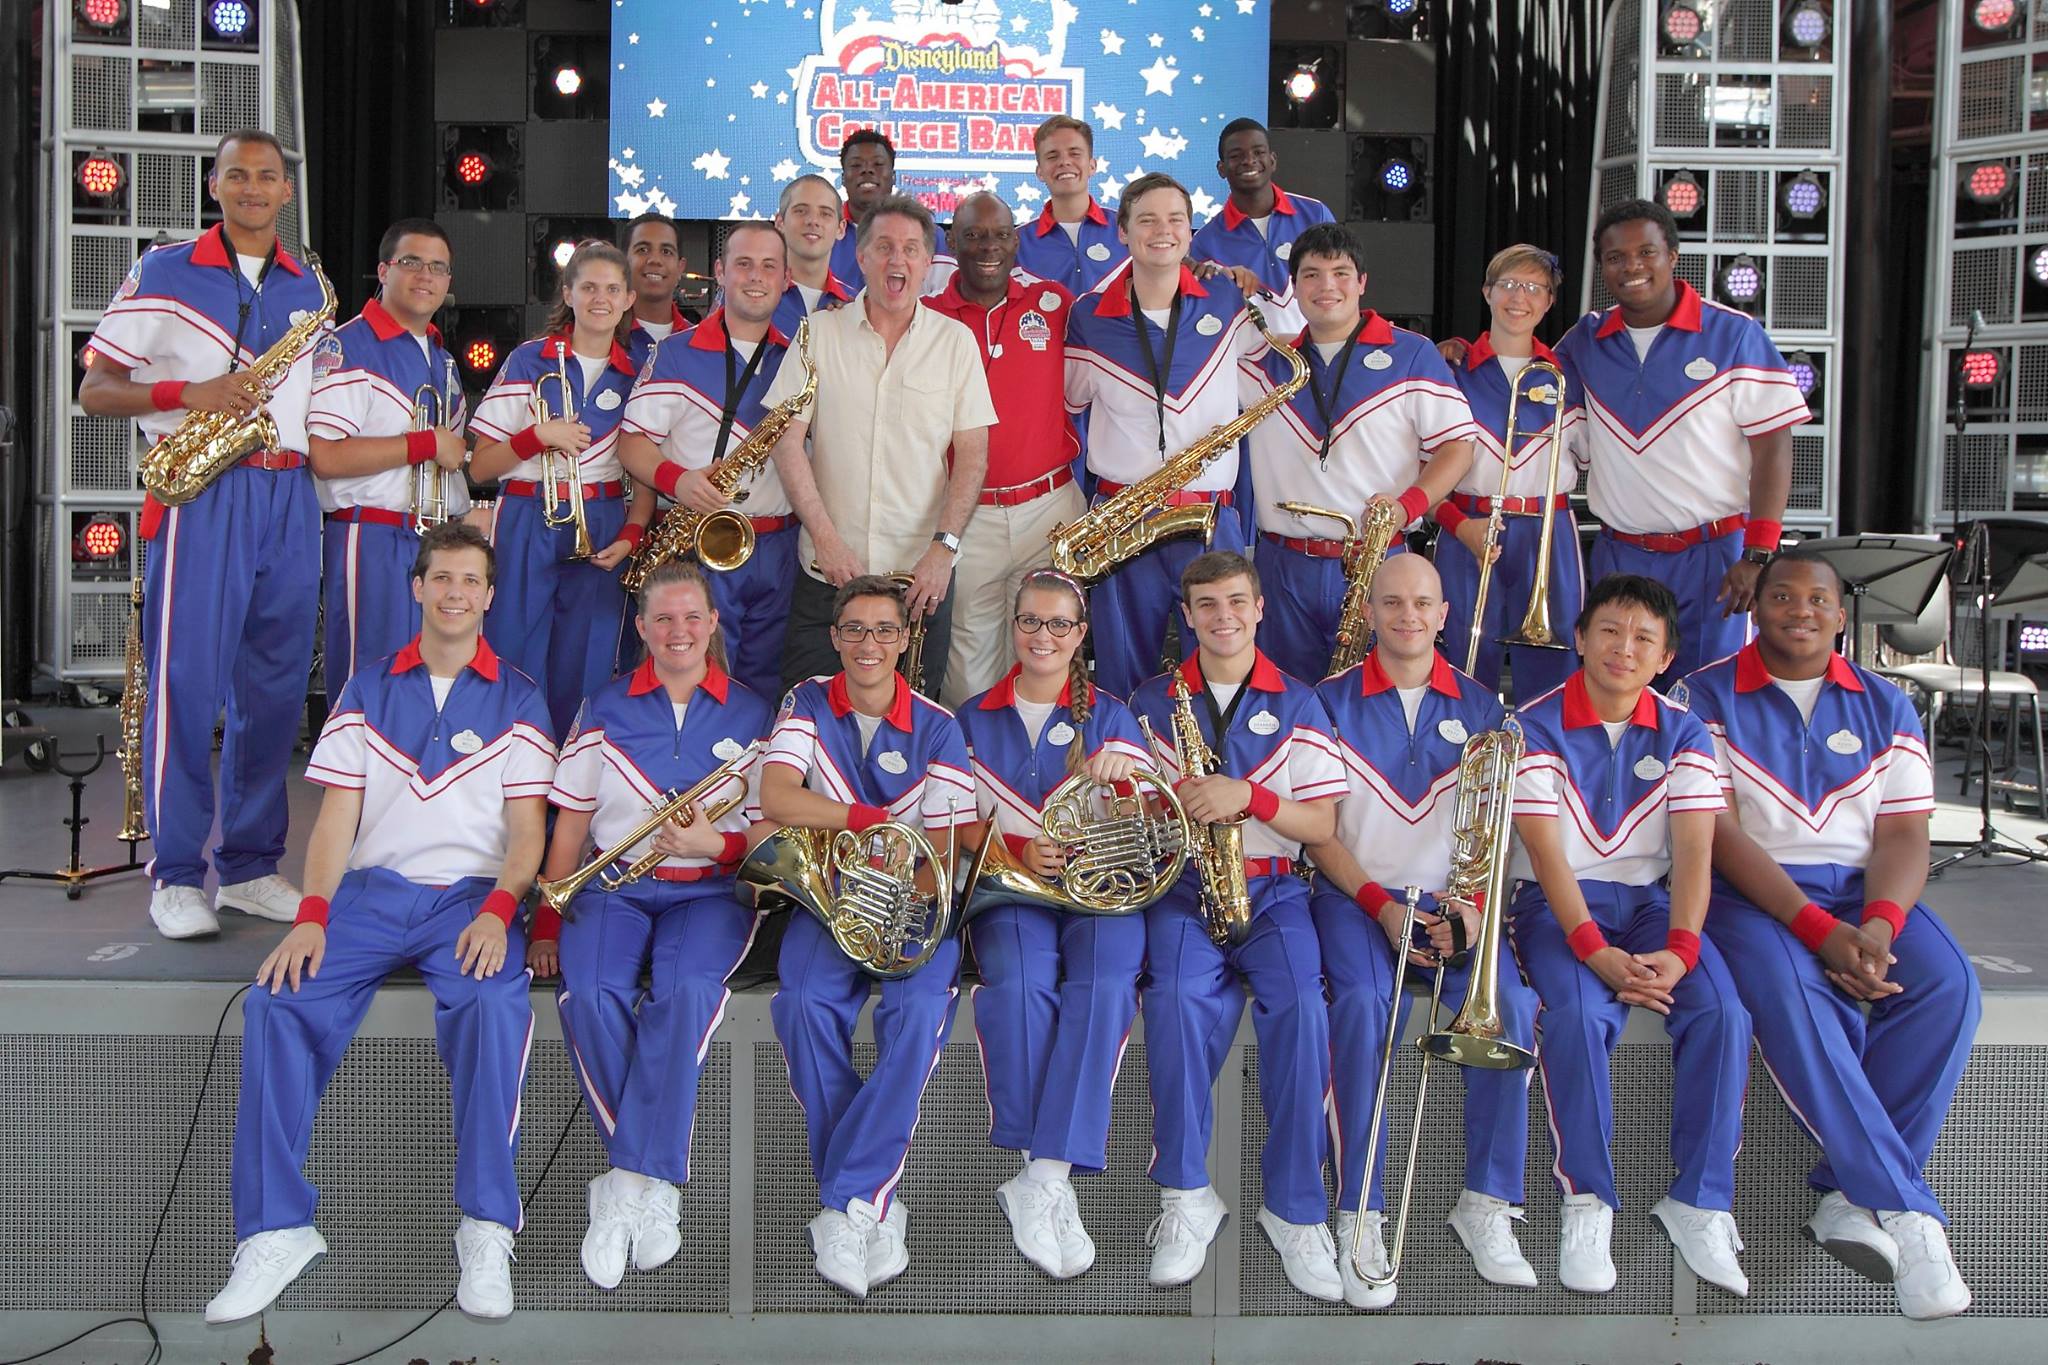 Gordon Goodwin and the Disneyland Resort 2016 All-American College Band